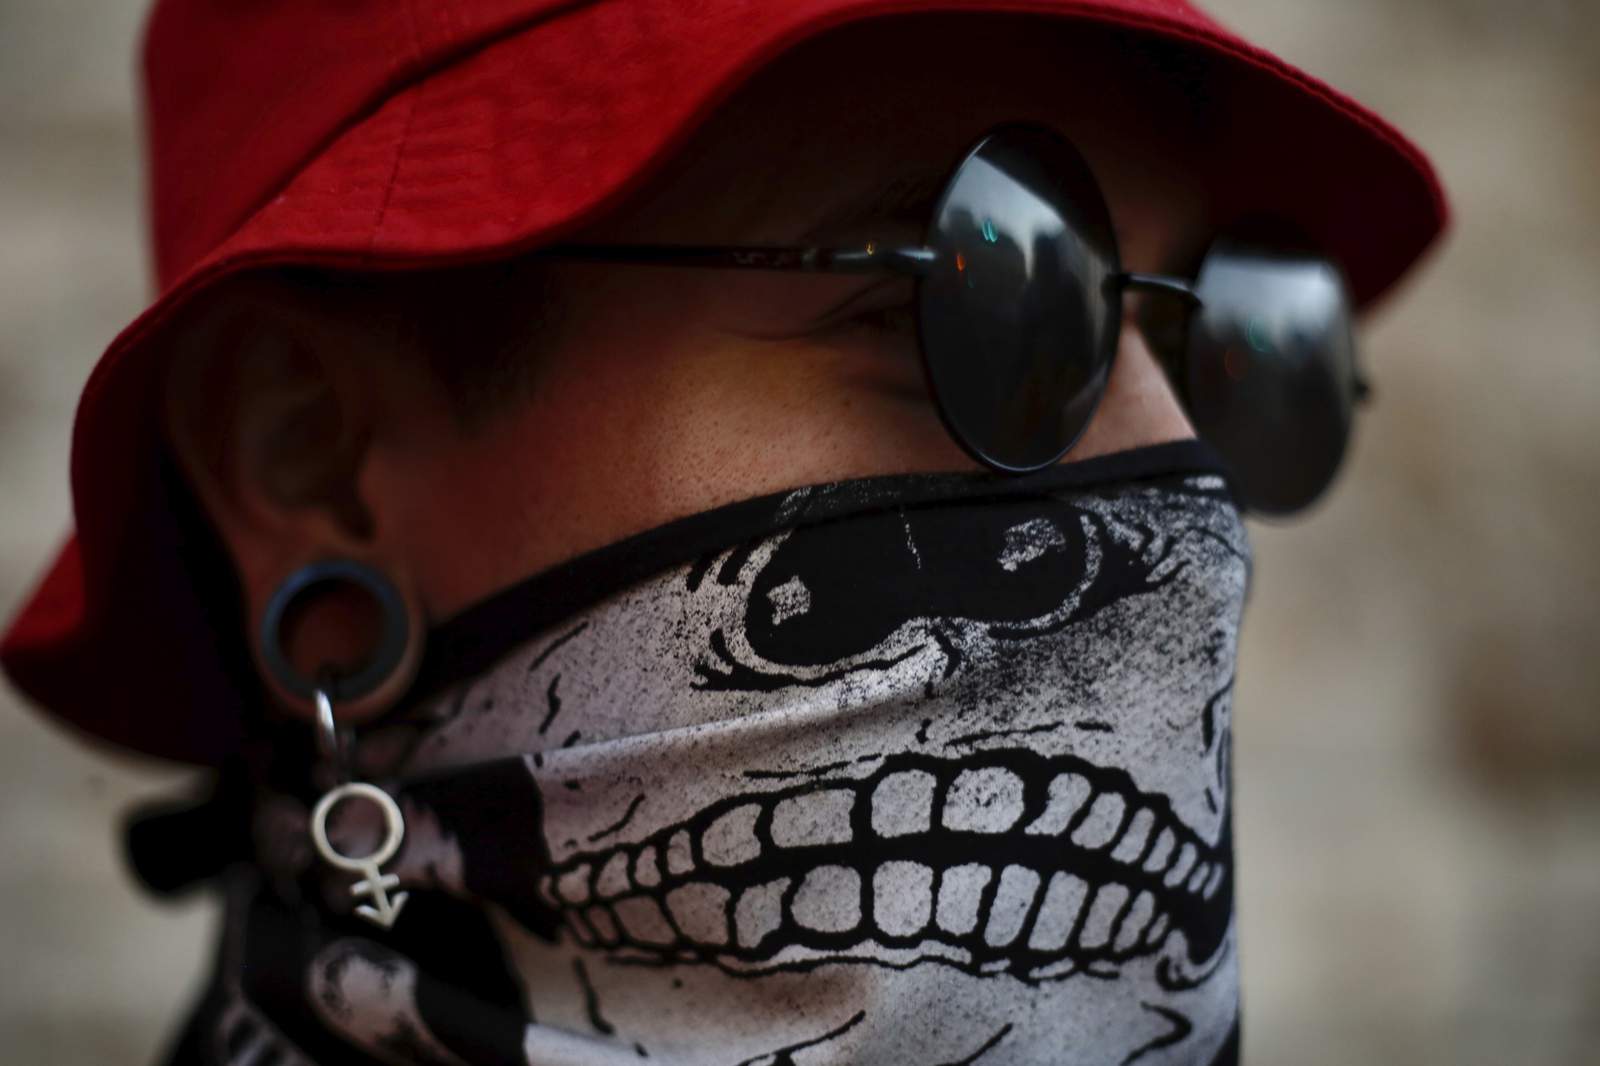 Study: Neck gaiter worse than not wearing mask. Here’s why